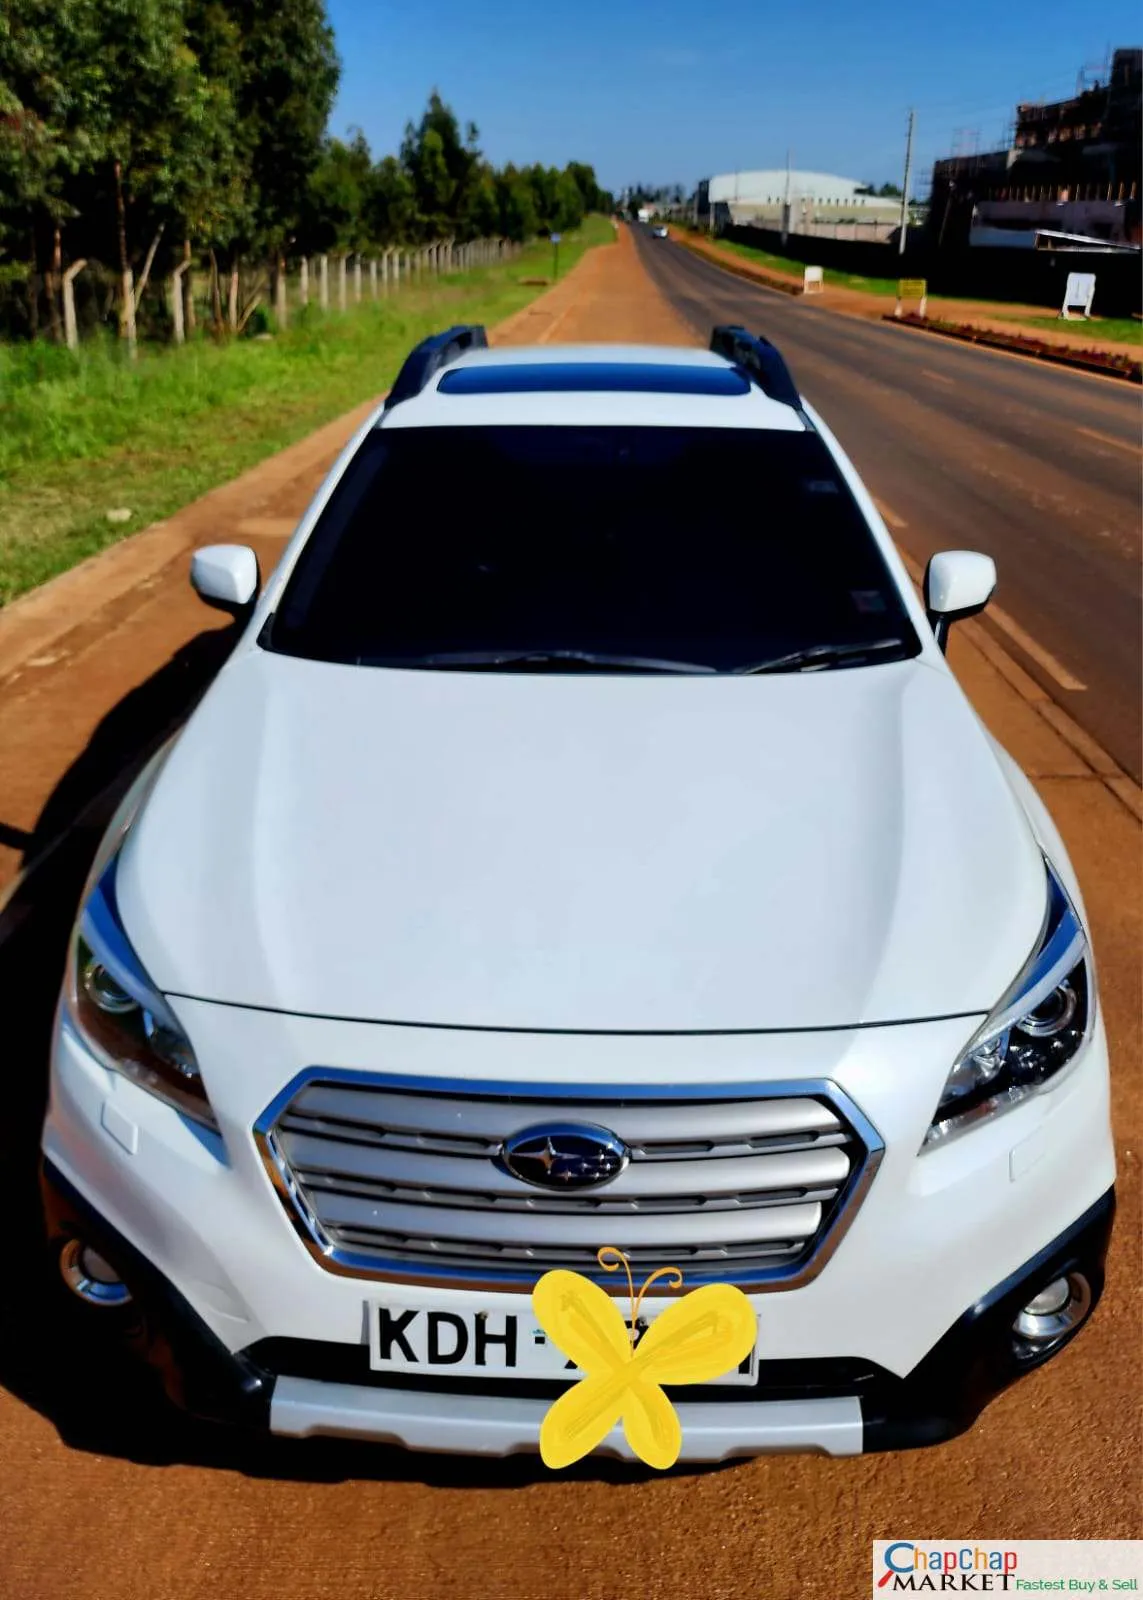 Cars Cars For Sale-Subaru OUTBACK for sale in kenya QUICKEST SALE You Pay 30% Deposit Trade in Ok hire purchase installments Subaru outback kenya 12